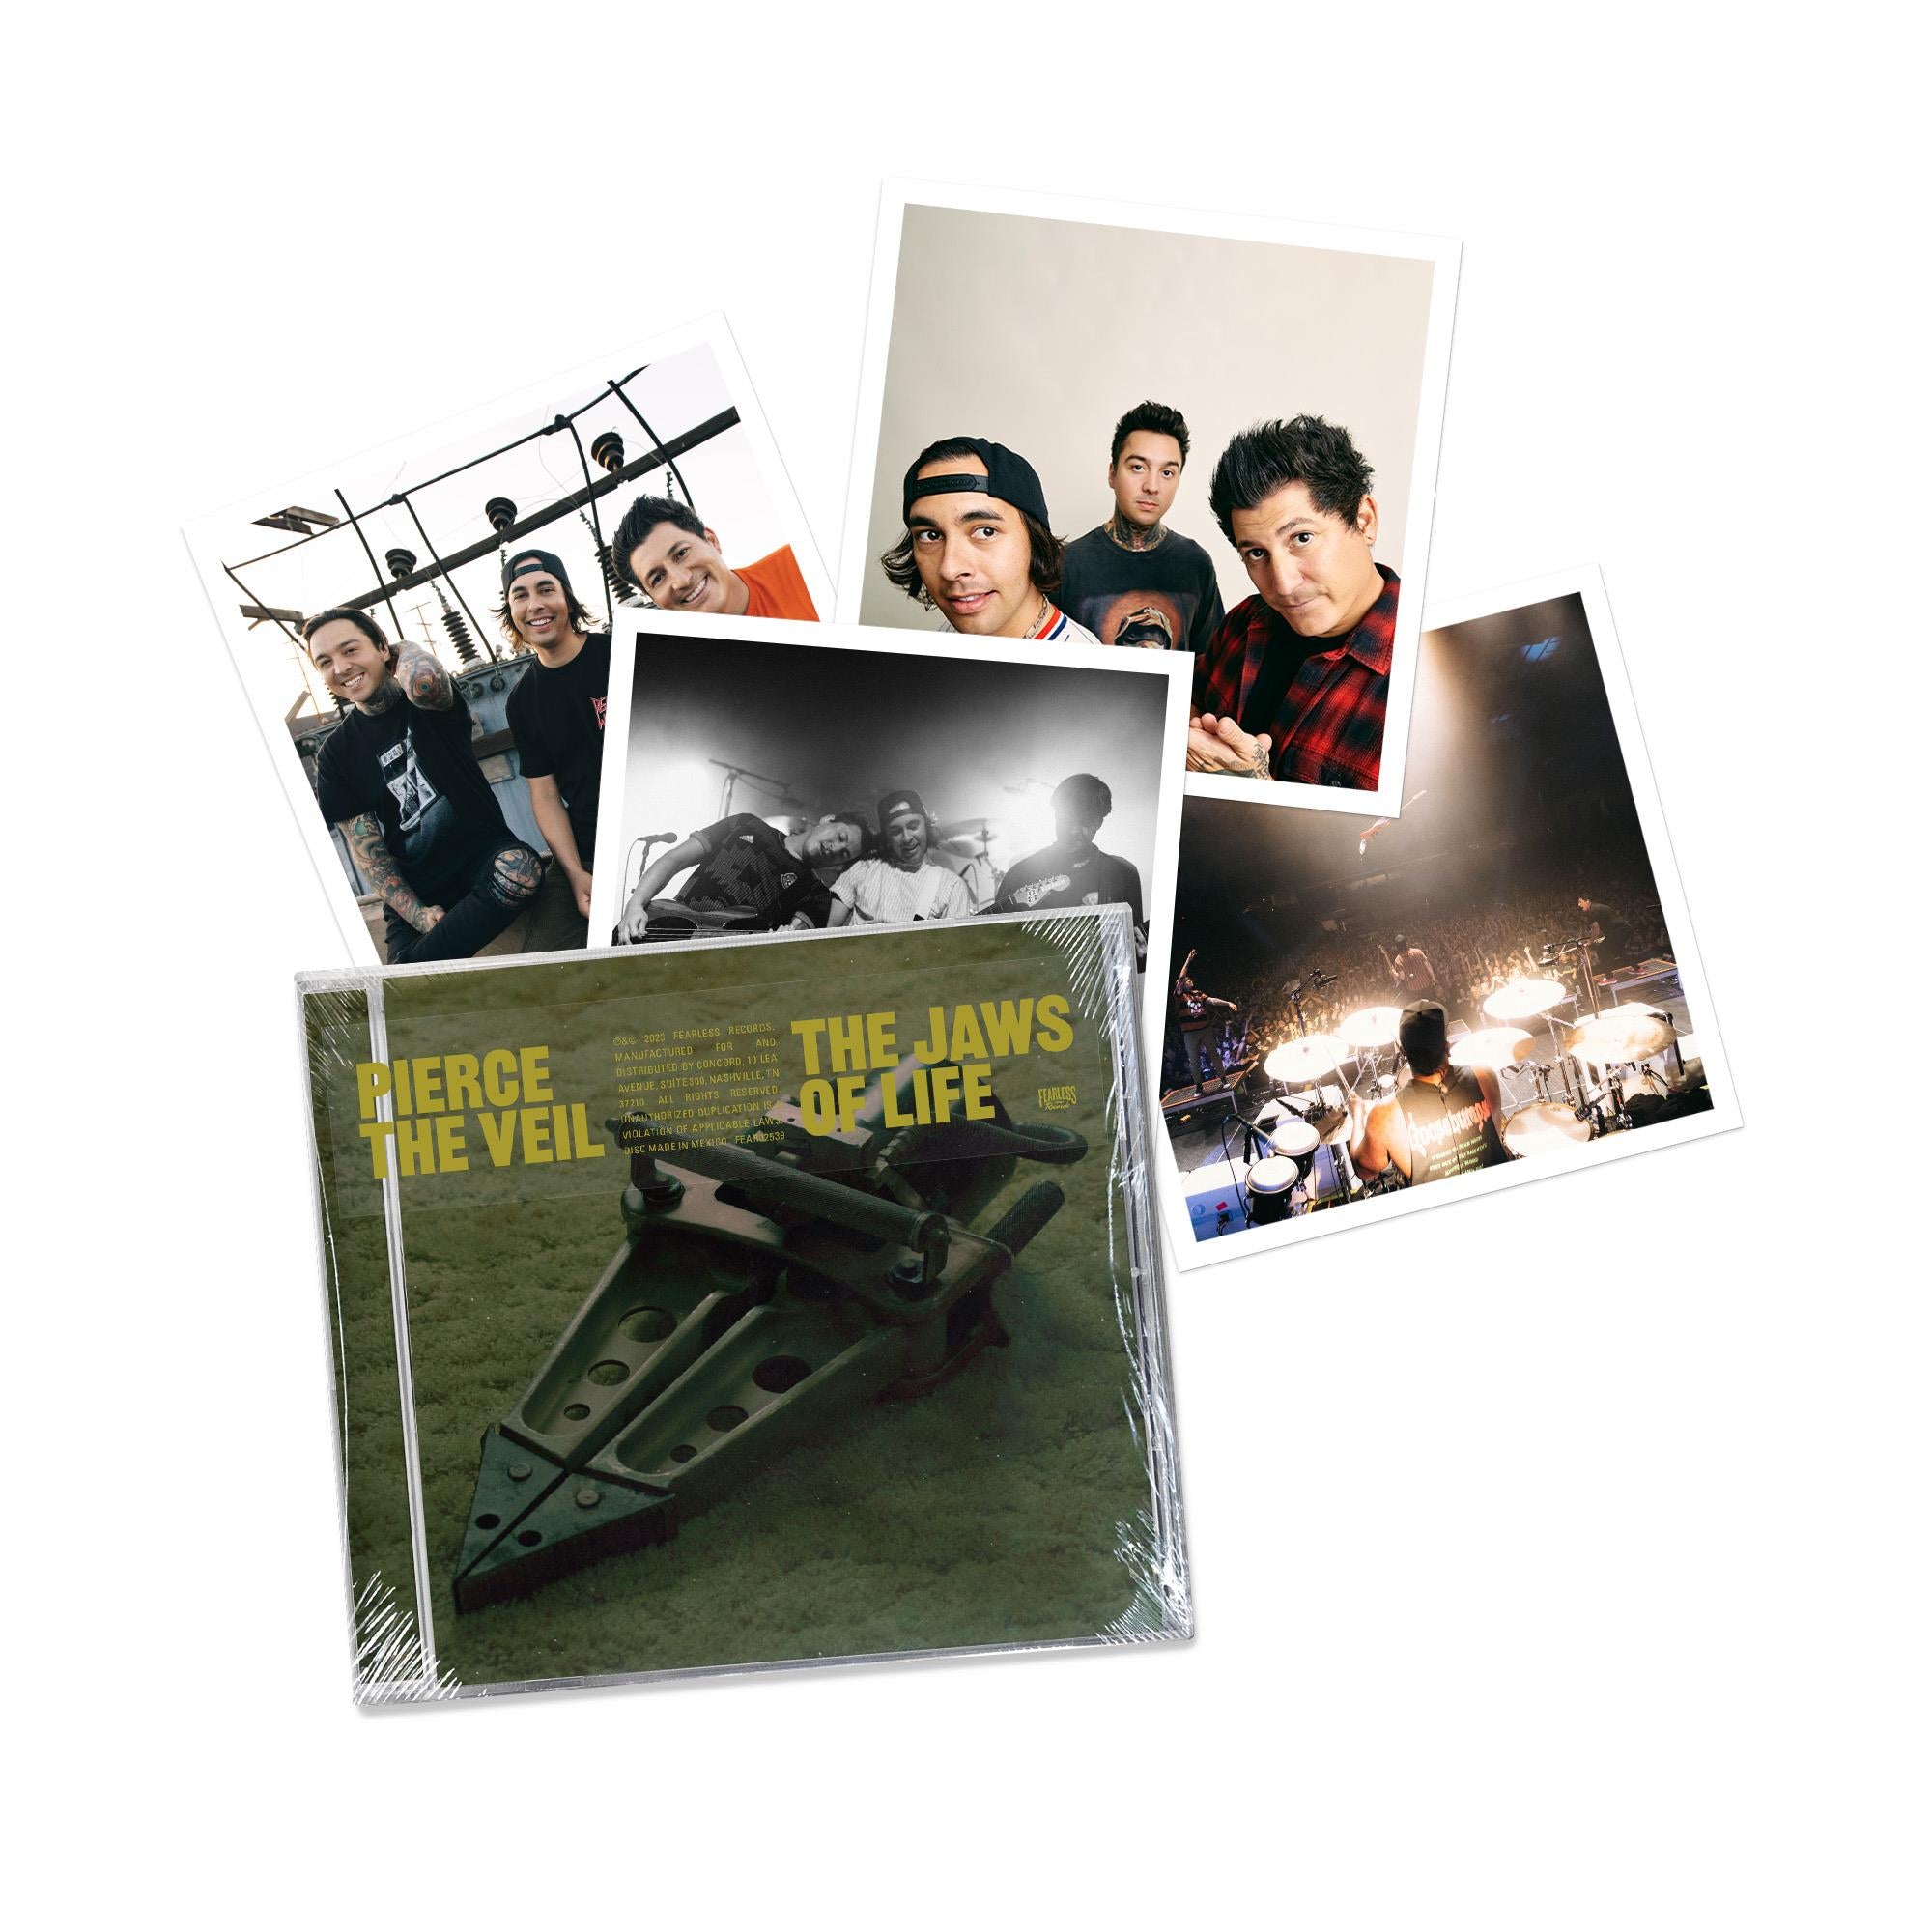 PIERCE THE VEIL THE JAWS OF LIFE [NEW CD] TARGET EXCLUSIVE 4 PHOTOS HYPE  STICKER | eBay